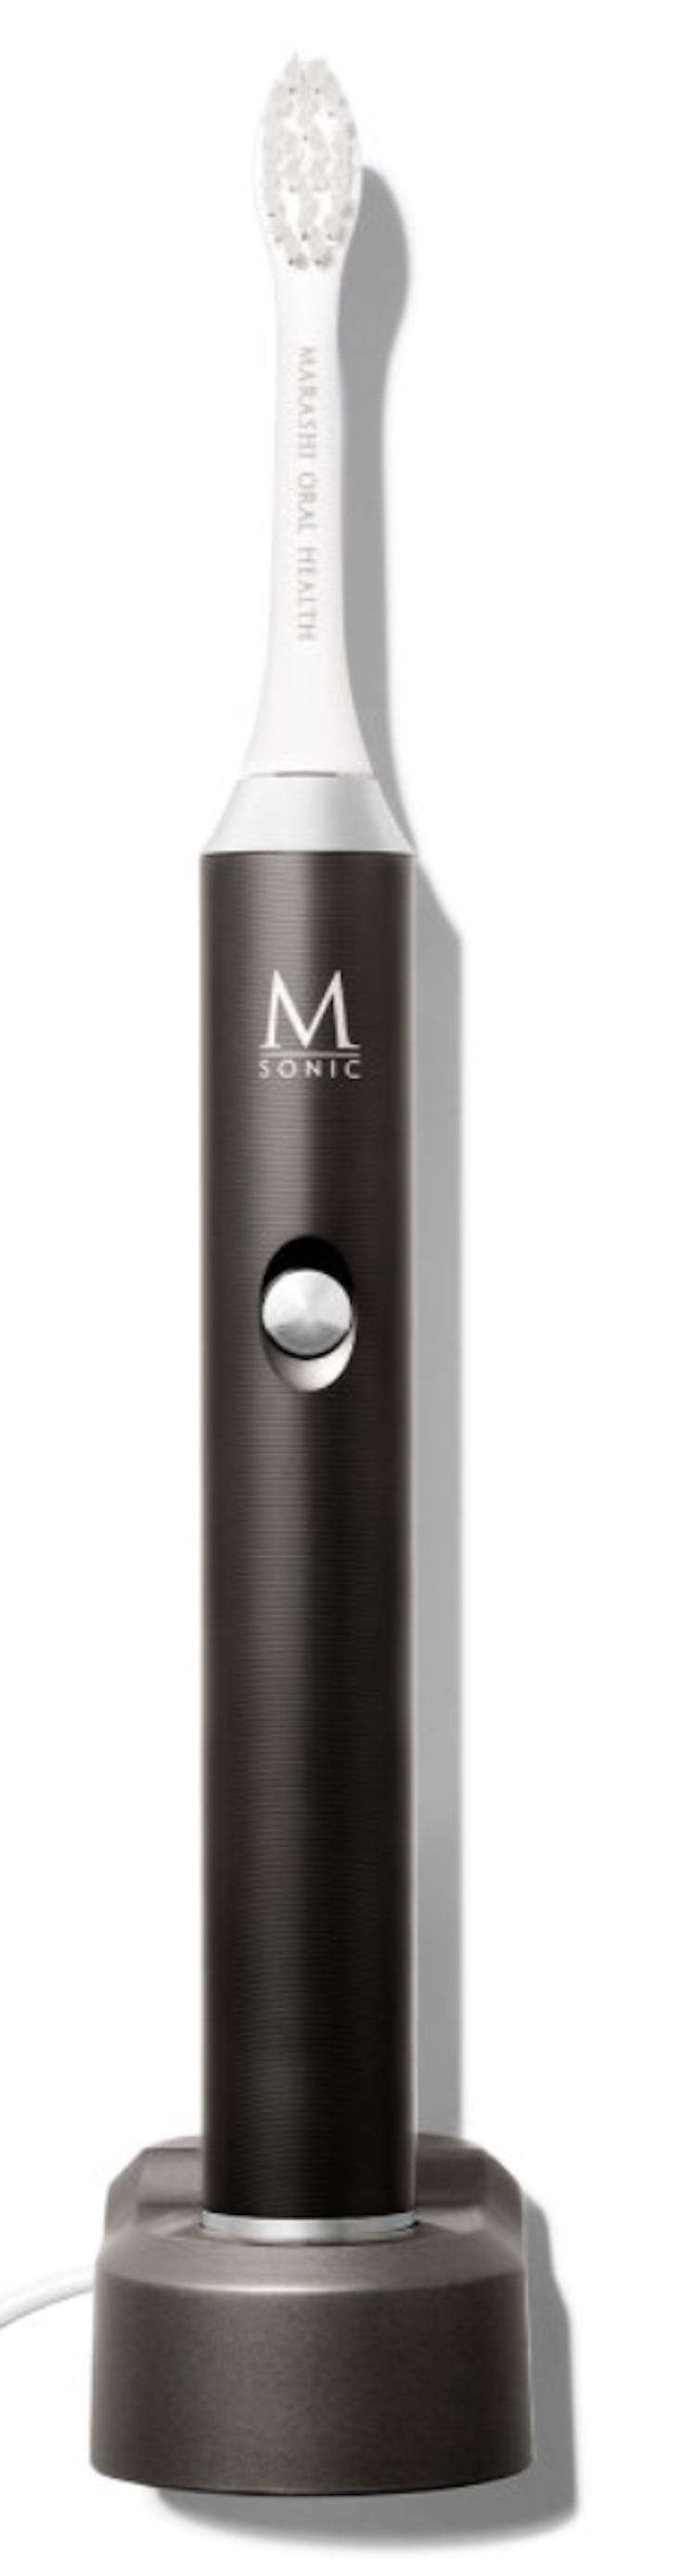 Marshi Oral Health M Sonic Toothbrush for oral care